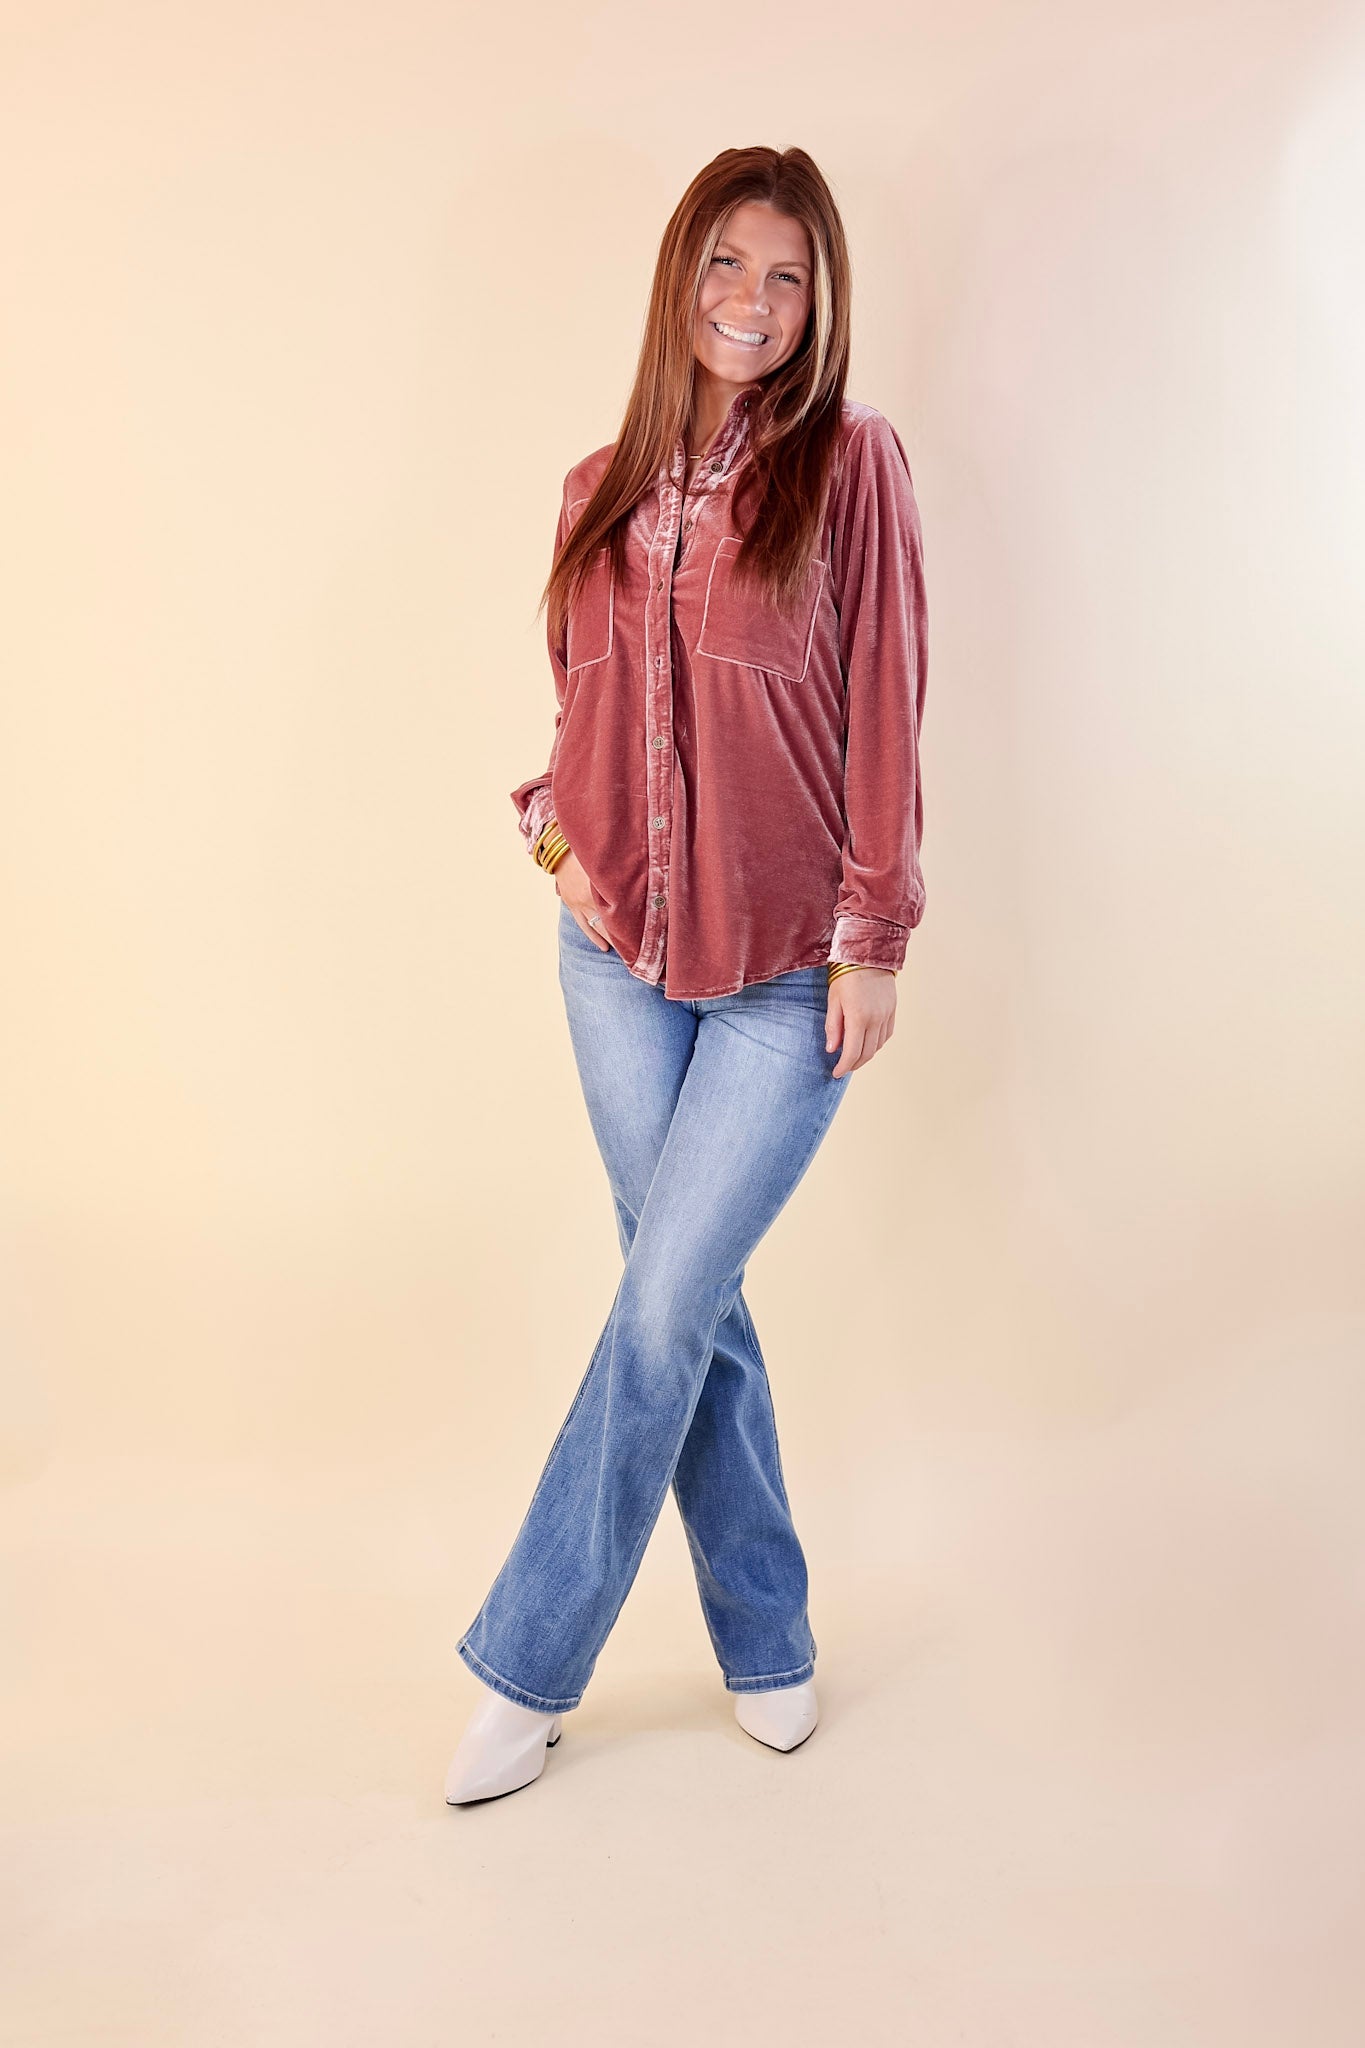 Candy Apple Evening Button Up Velvet Long Sleeve Blouse in Rose Quartz Pink - Giddy Up Glamour Boutique